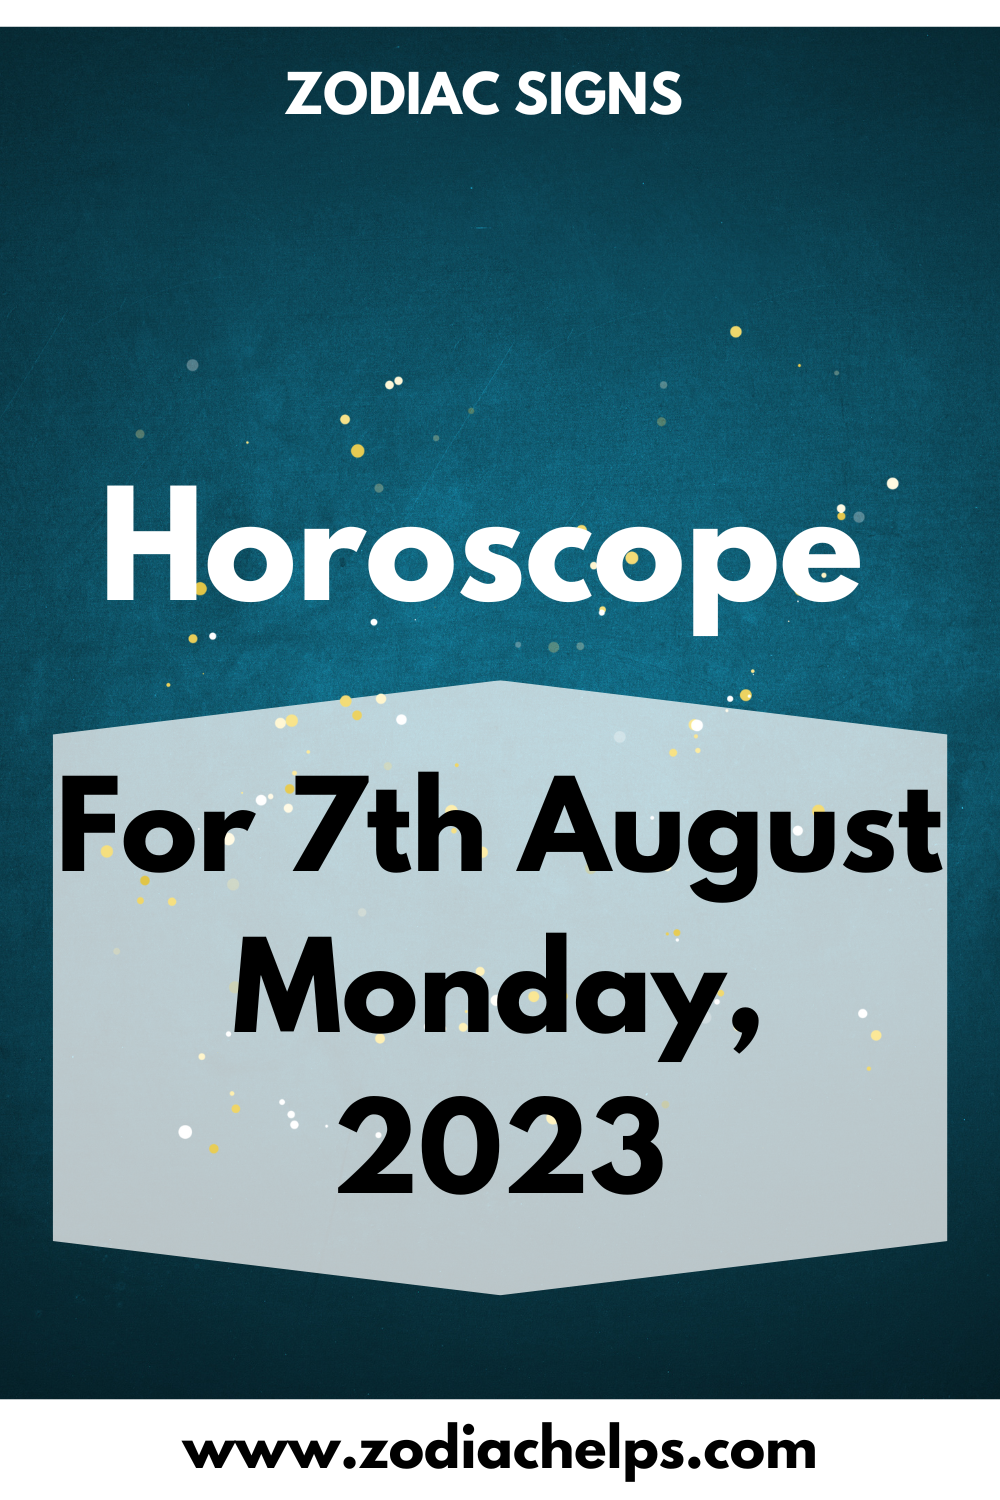 Horoscope for 7th August Monday, 2023